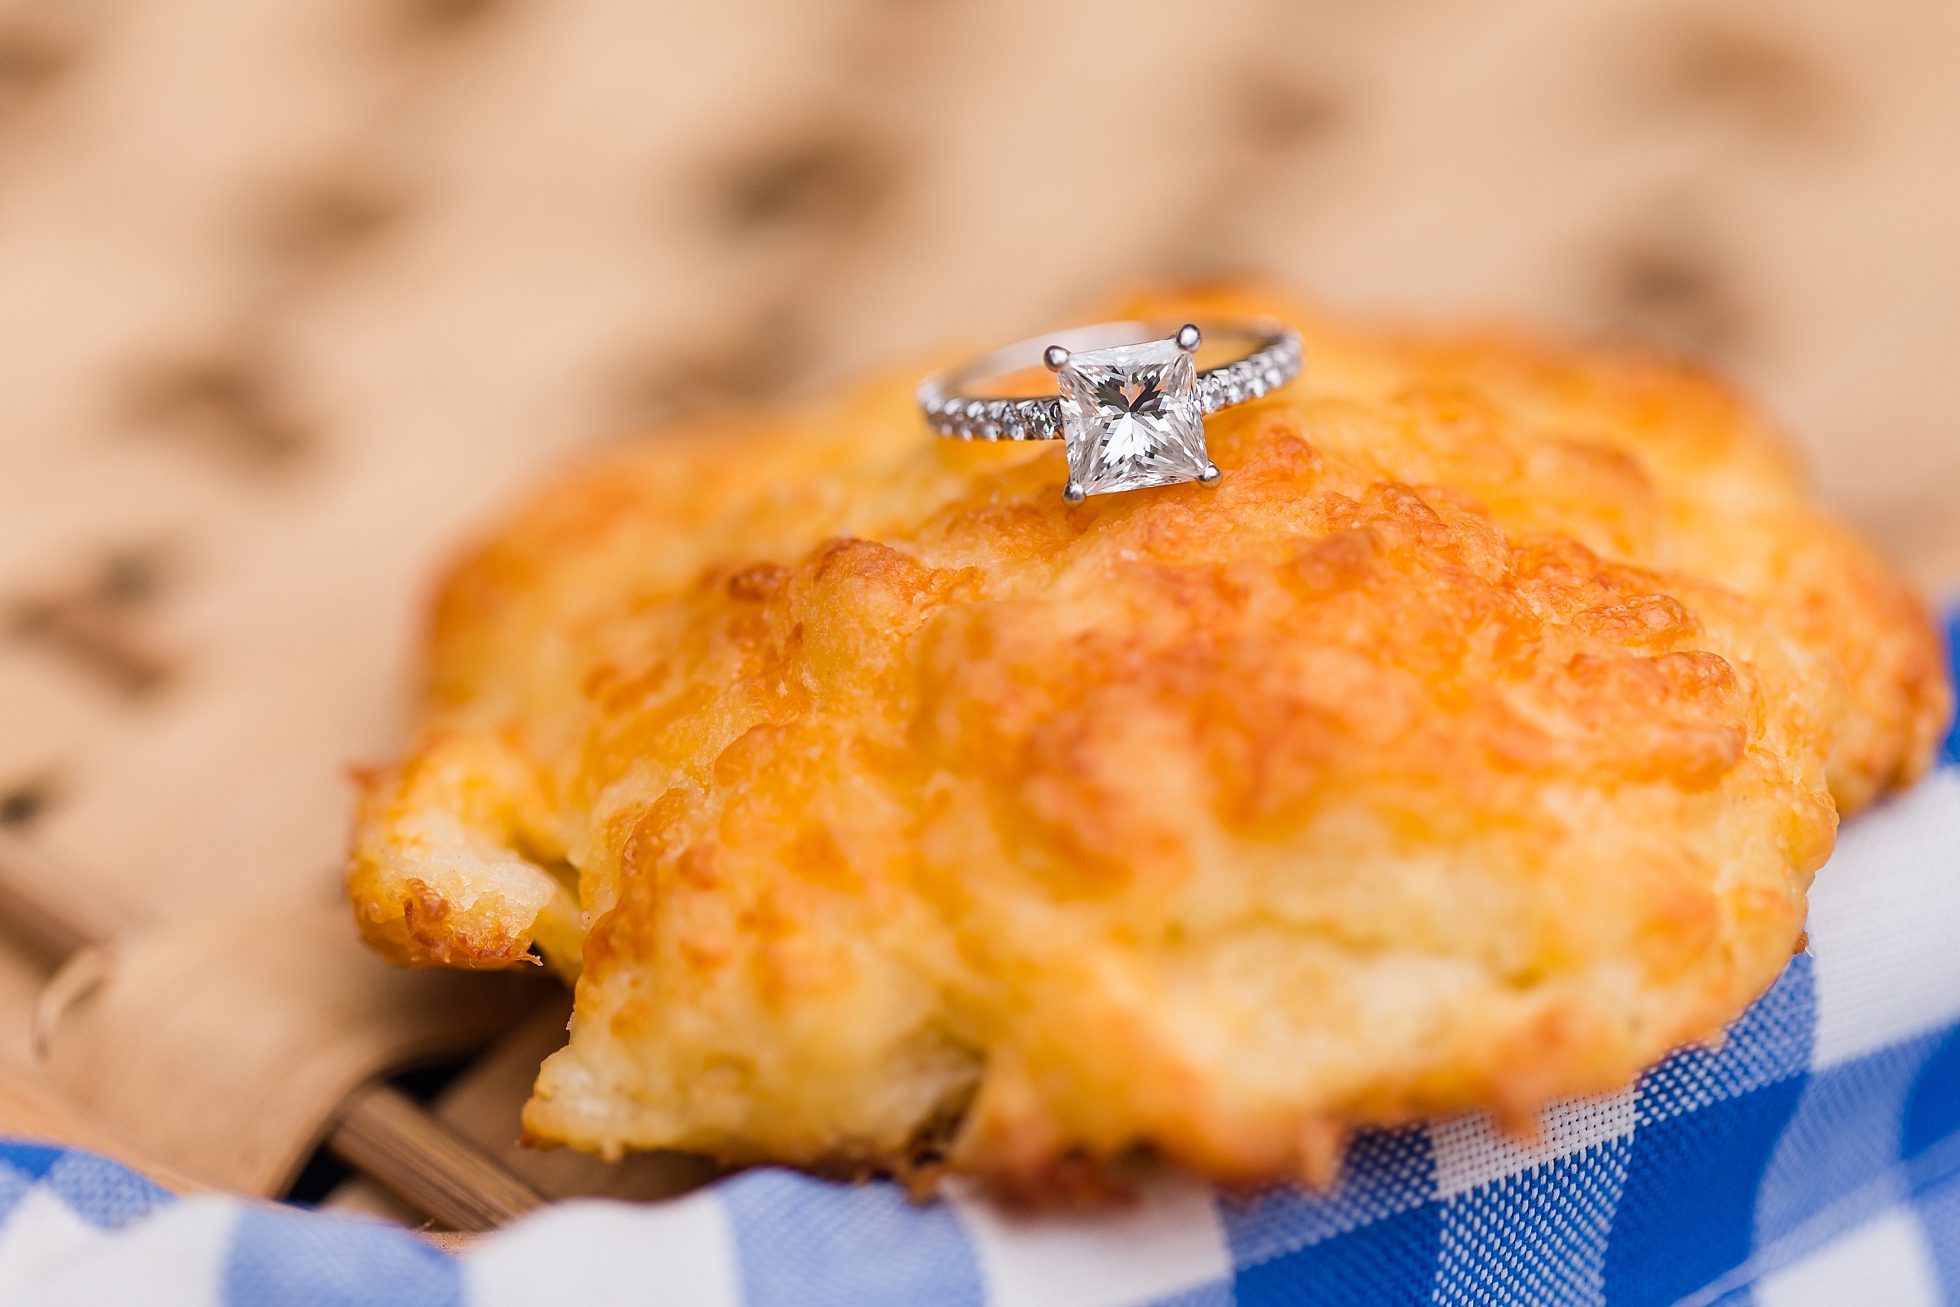 biscuits engagement ring bicnic